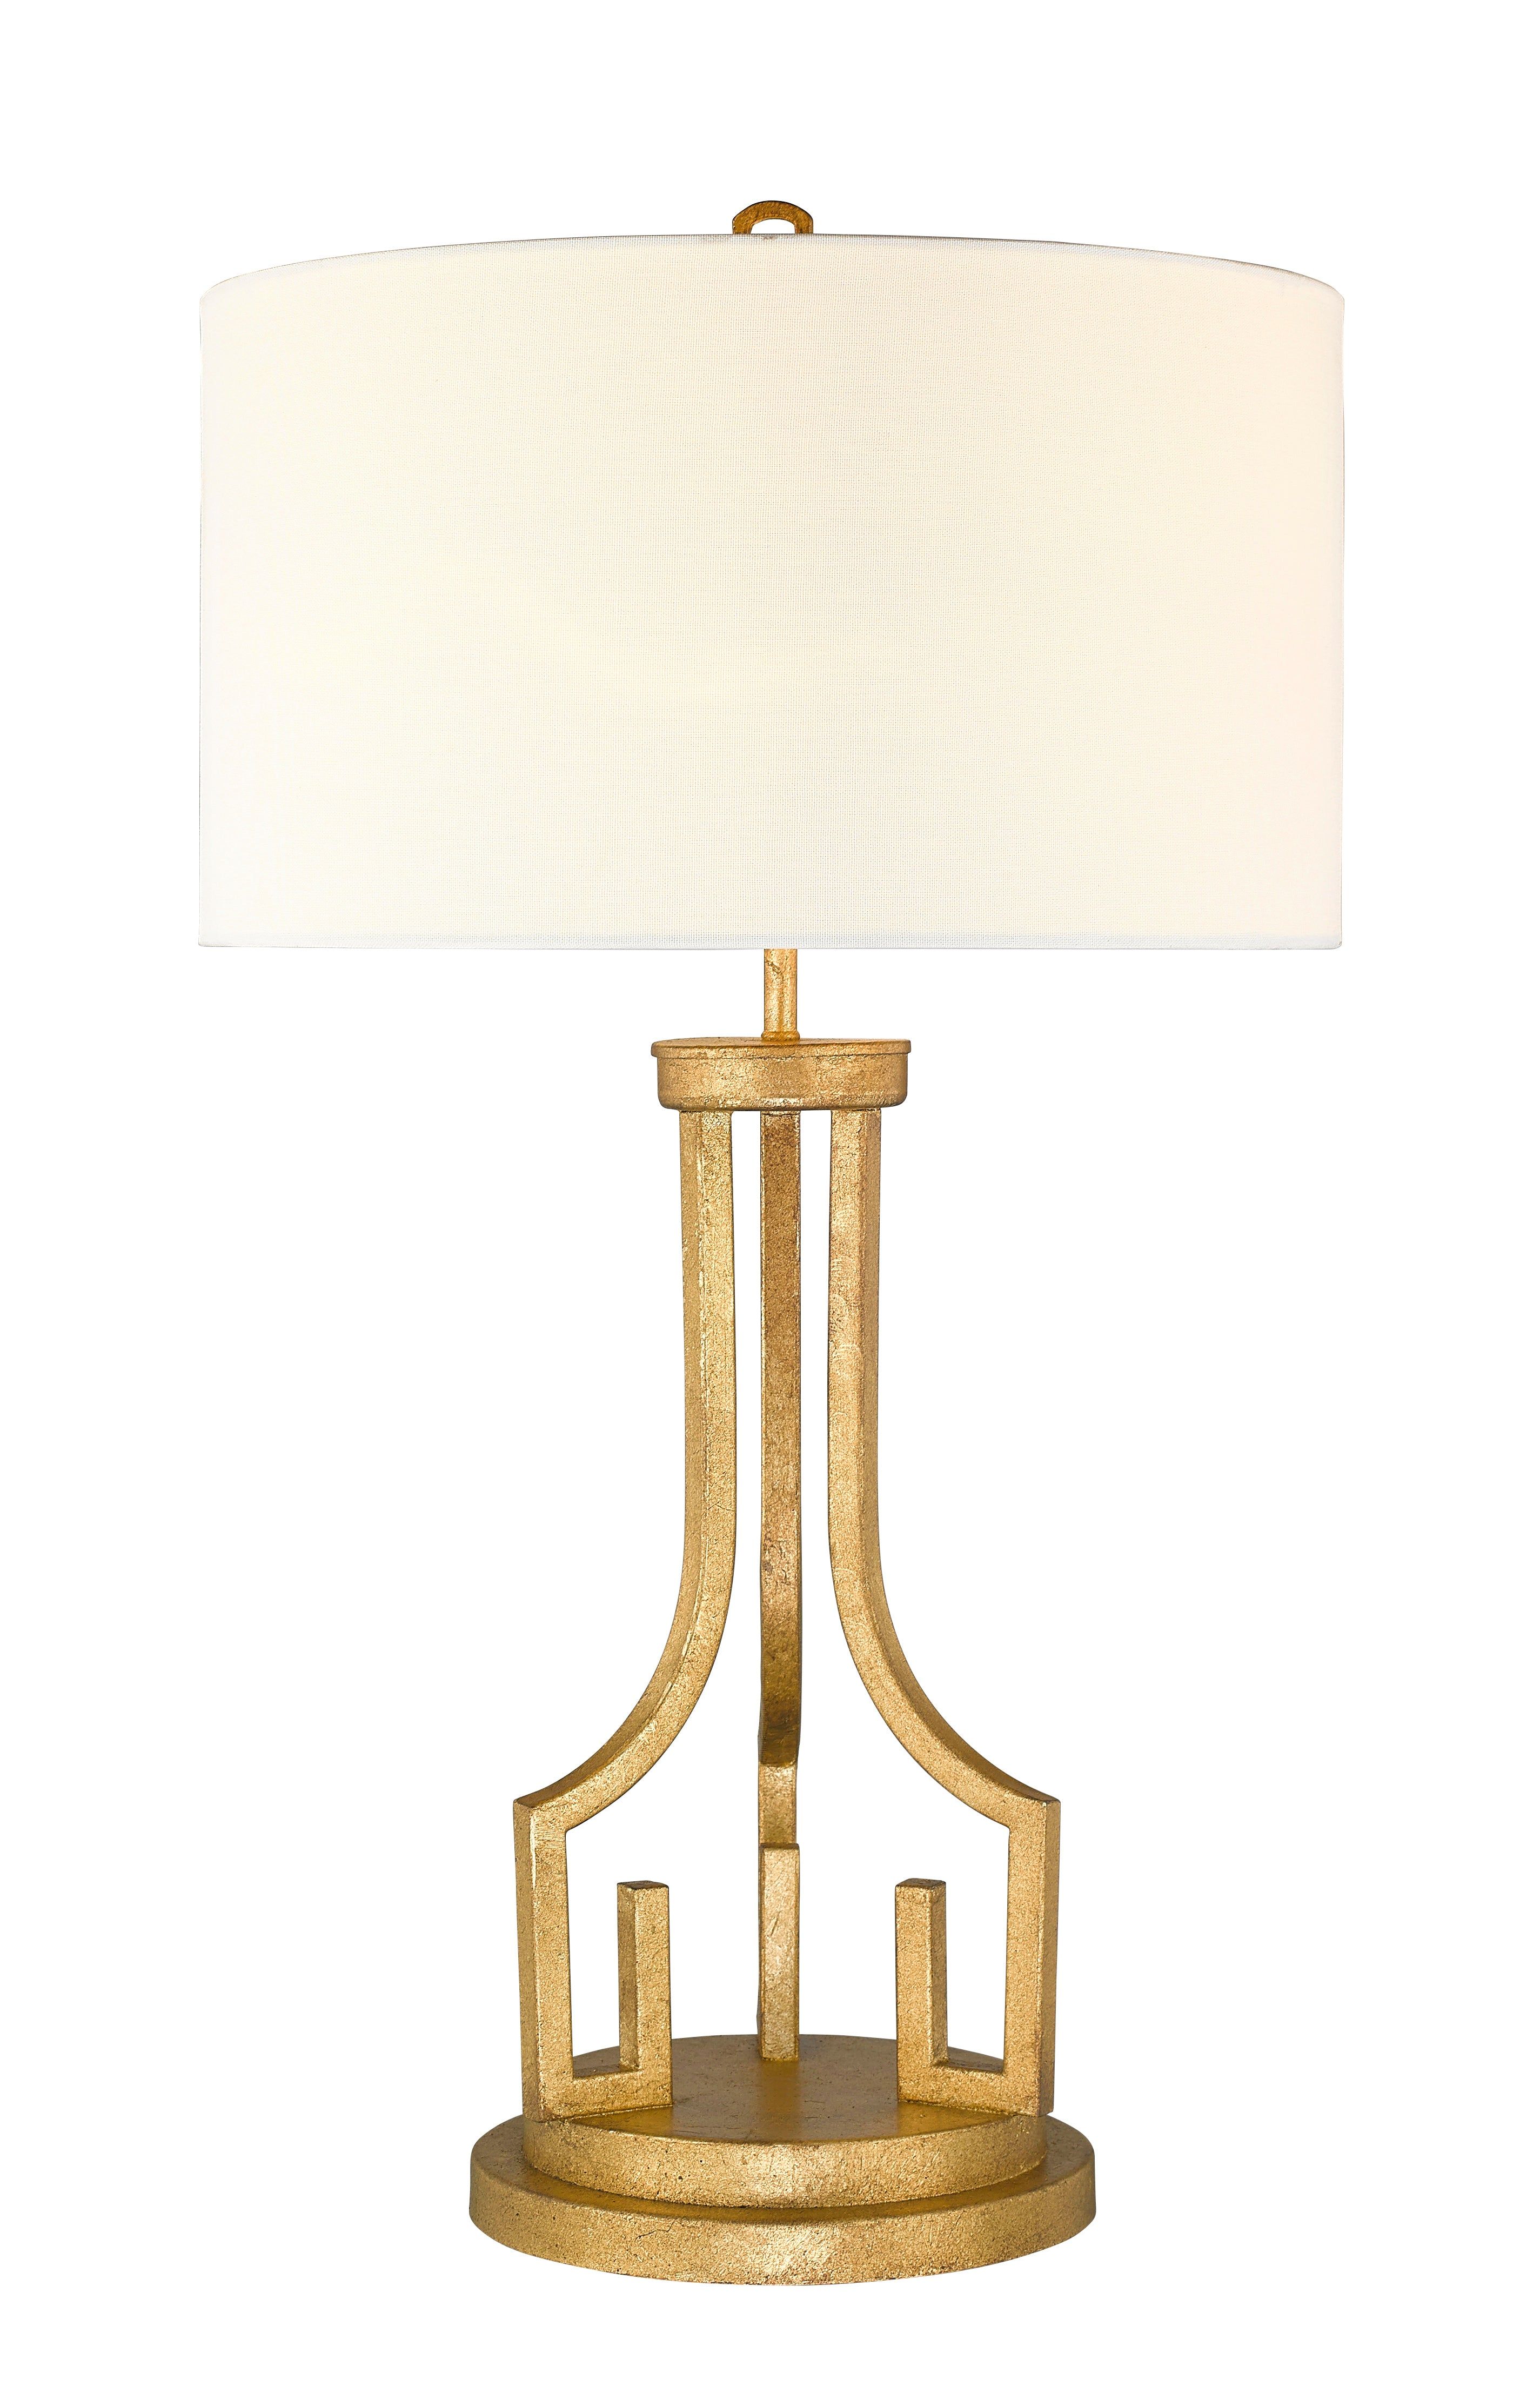 Lucas Mckearn Lemuria Large Buffet Lamp In And White Drum Shade in Distressed Gold N/A Lord & Taylor | Lord & Taylor